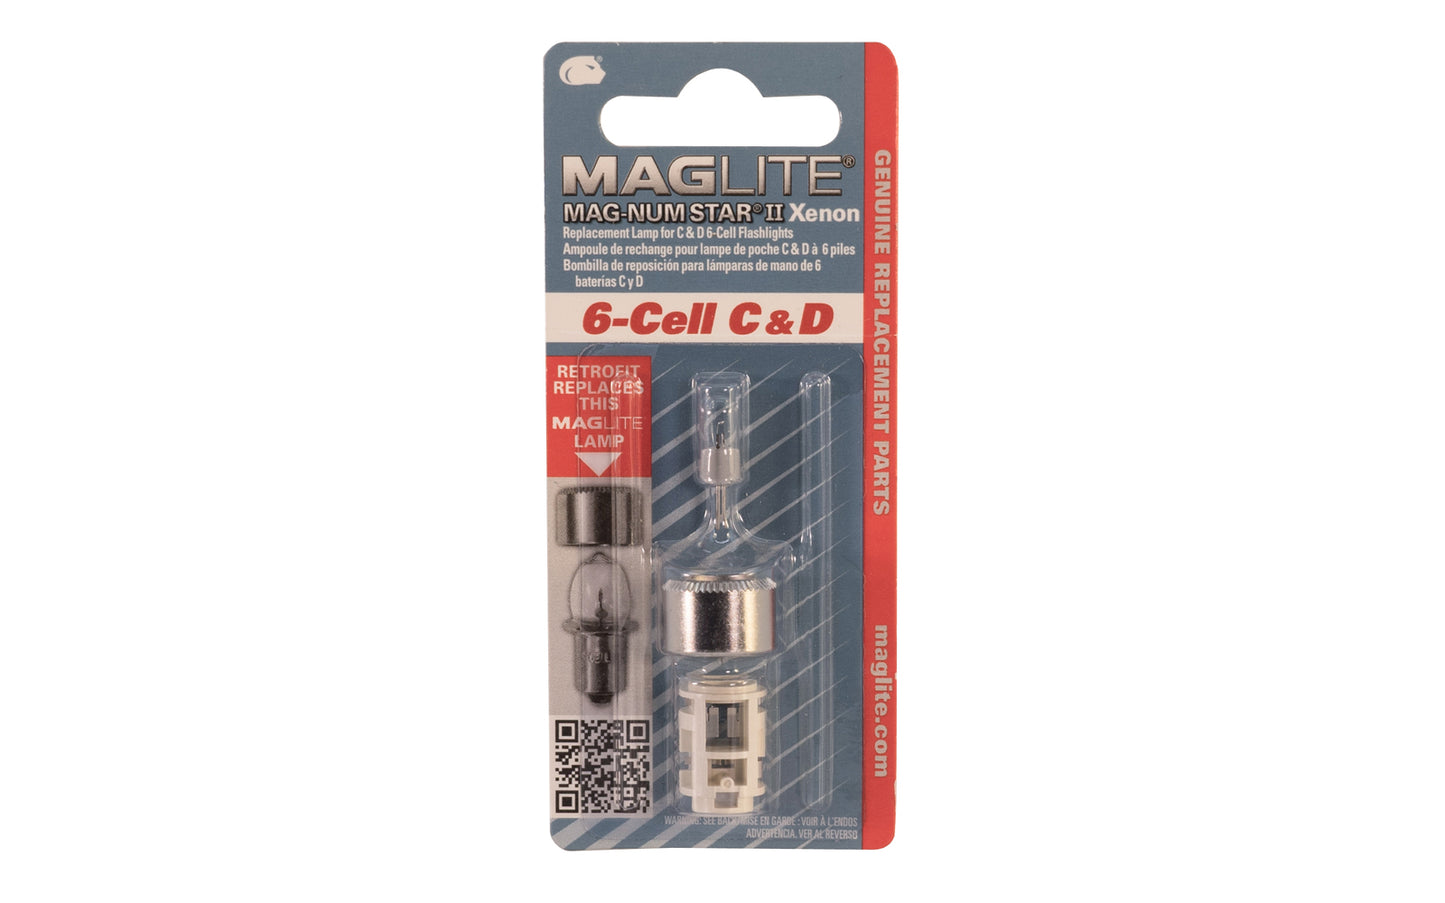 Maglite Replacement Lamp for C & D 6-cell flashlights. Maglite "Mag-Num Star II" Xenon. Made in Germany.